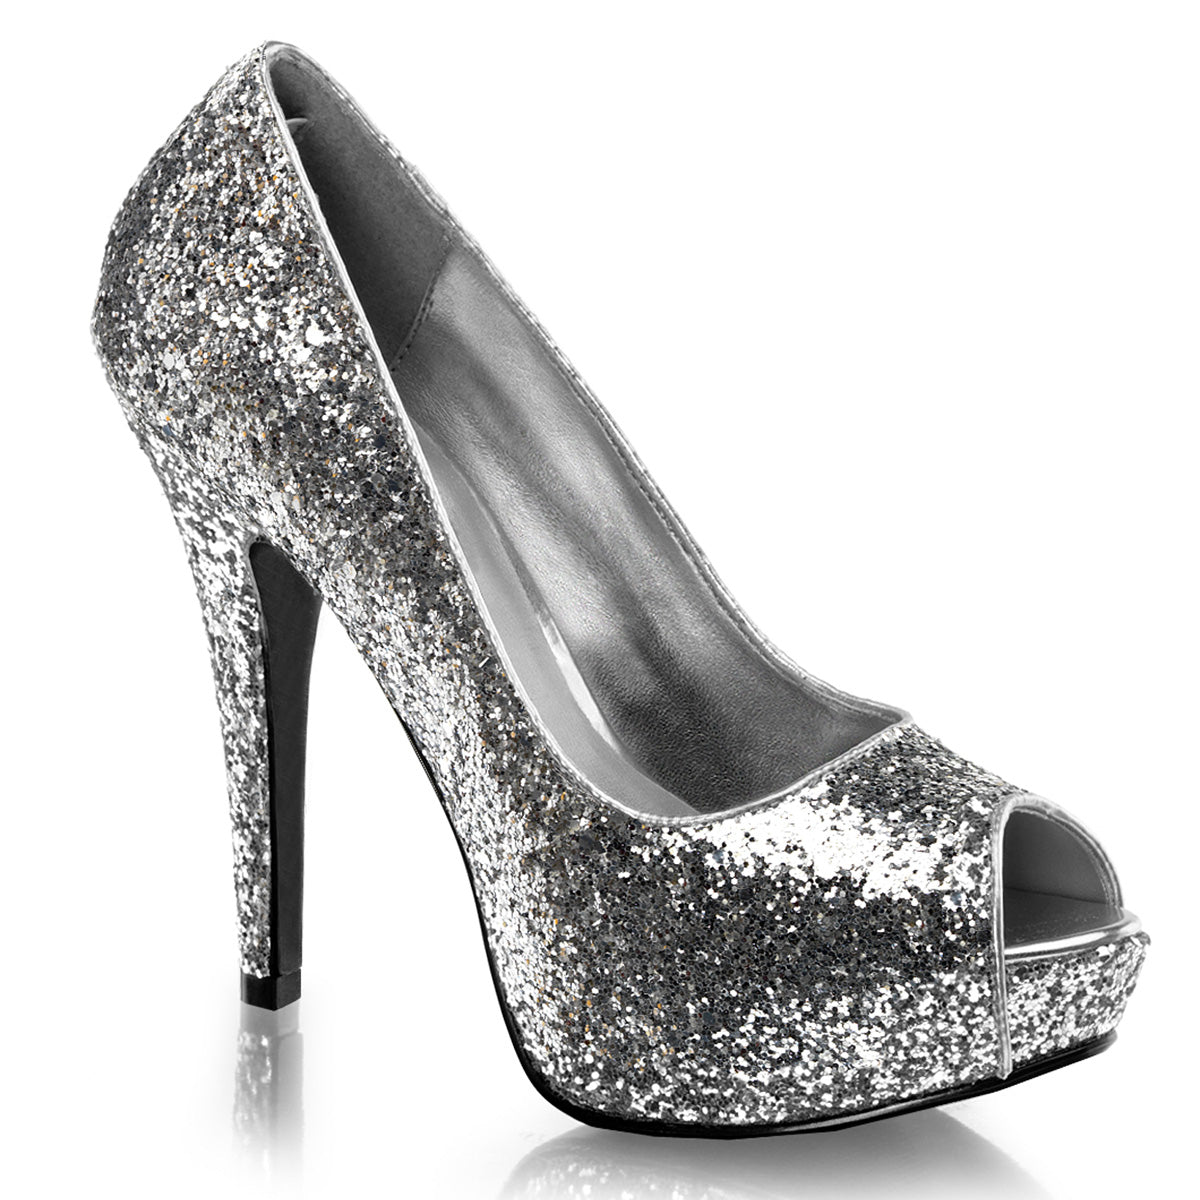 TWINKLE-18G Exotic Dancing Fabulicious Shoes Slv Glitter